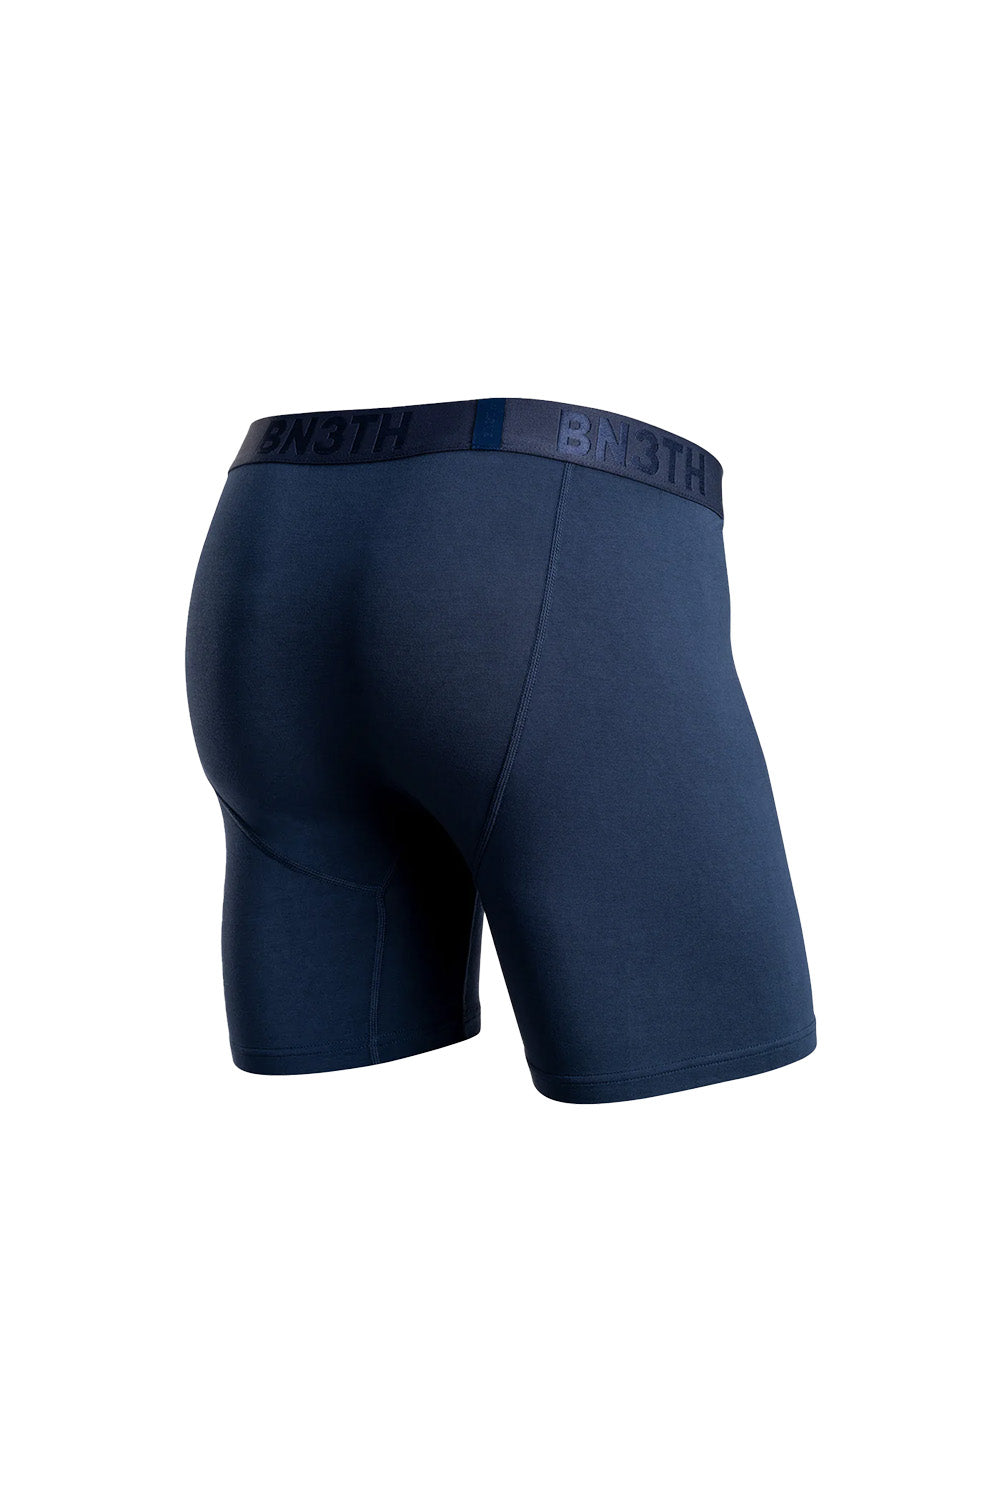 BN3TH - Classic Boxer Brief with Fly - Navy - Back